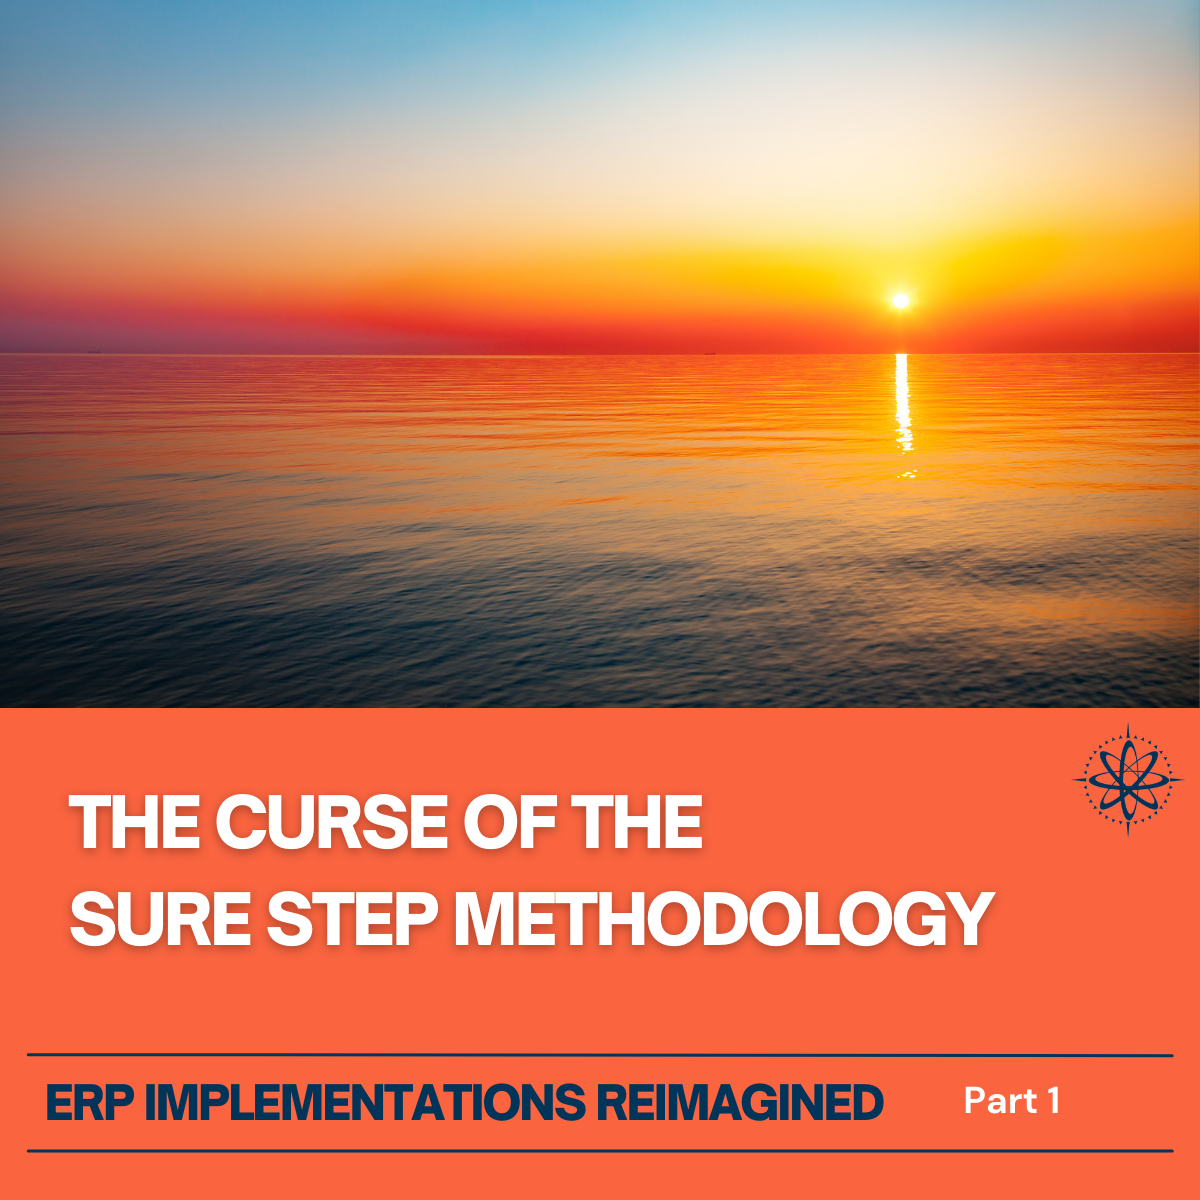 The dawn of a new era in erp implementations